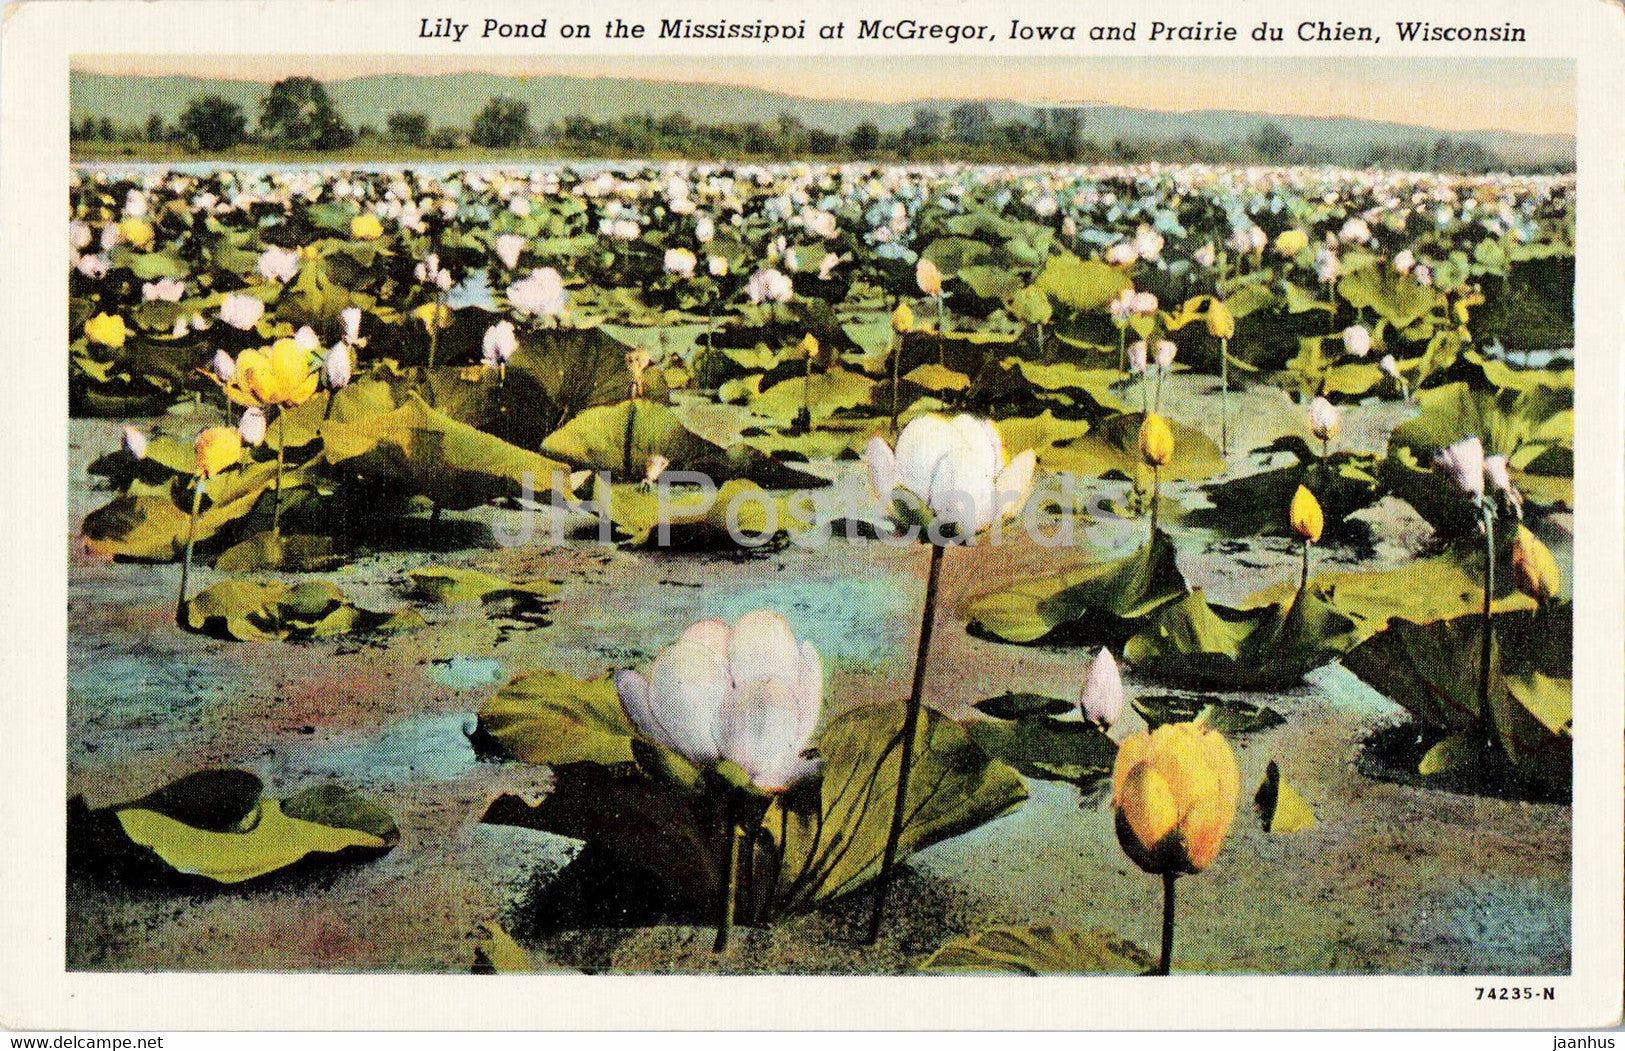 Lily Pond on the Mississippi at McGregor - Iowa and Prairie du Chien - Wisconsin - old postcard - USA - used - JH Postcards